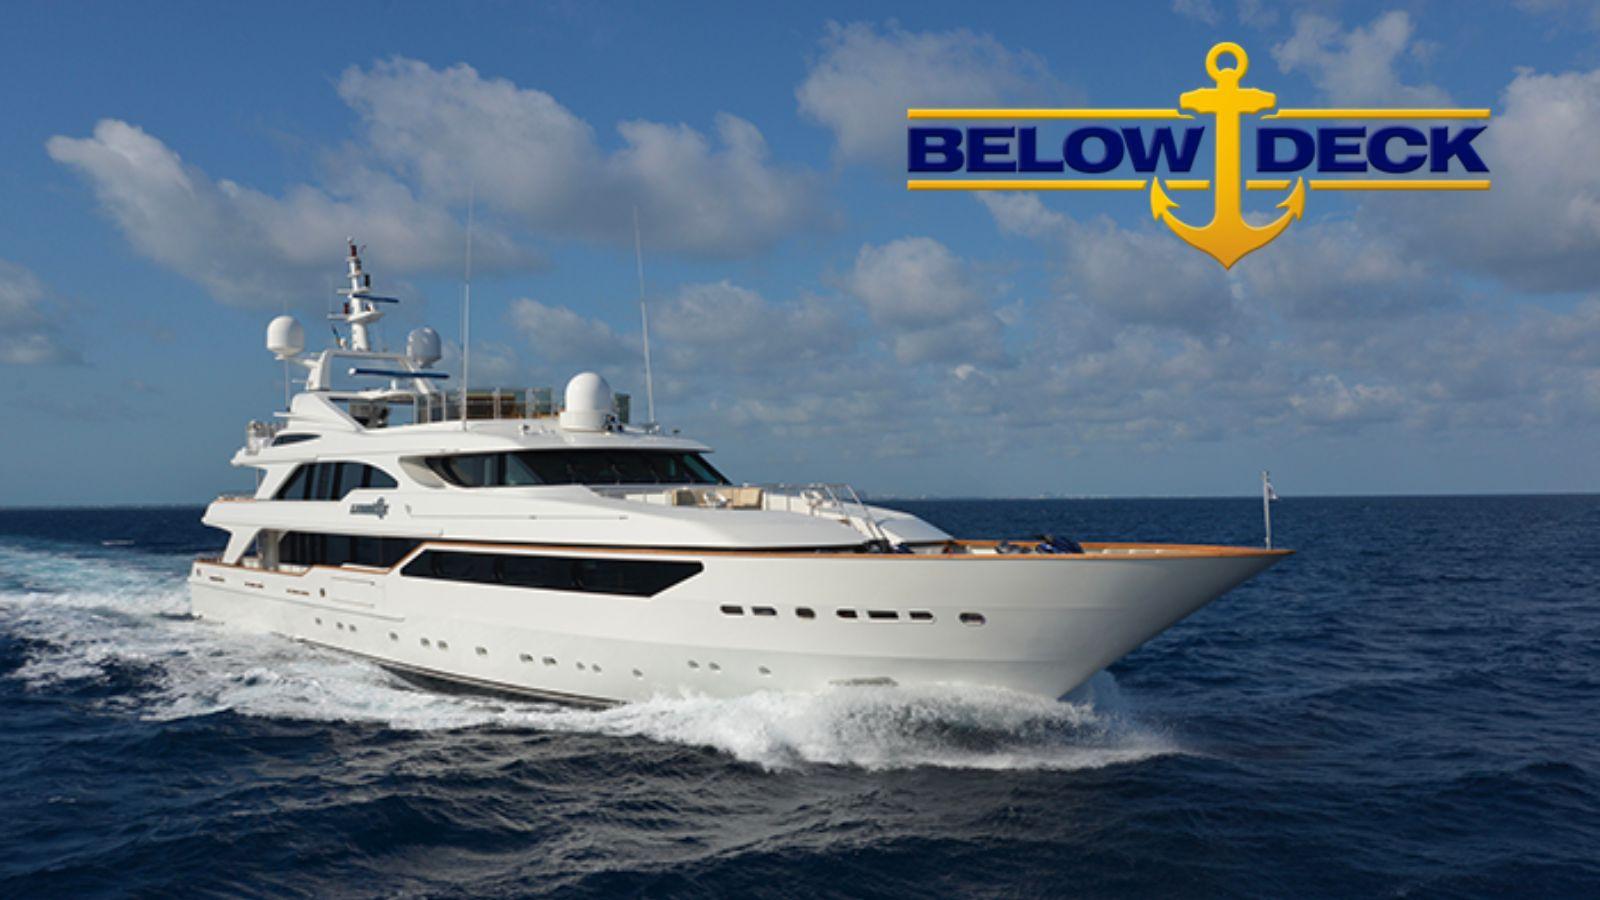 How much does a Below Deck charter cost?